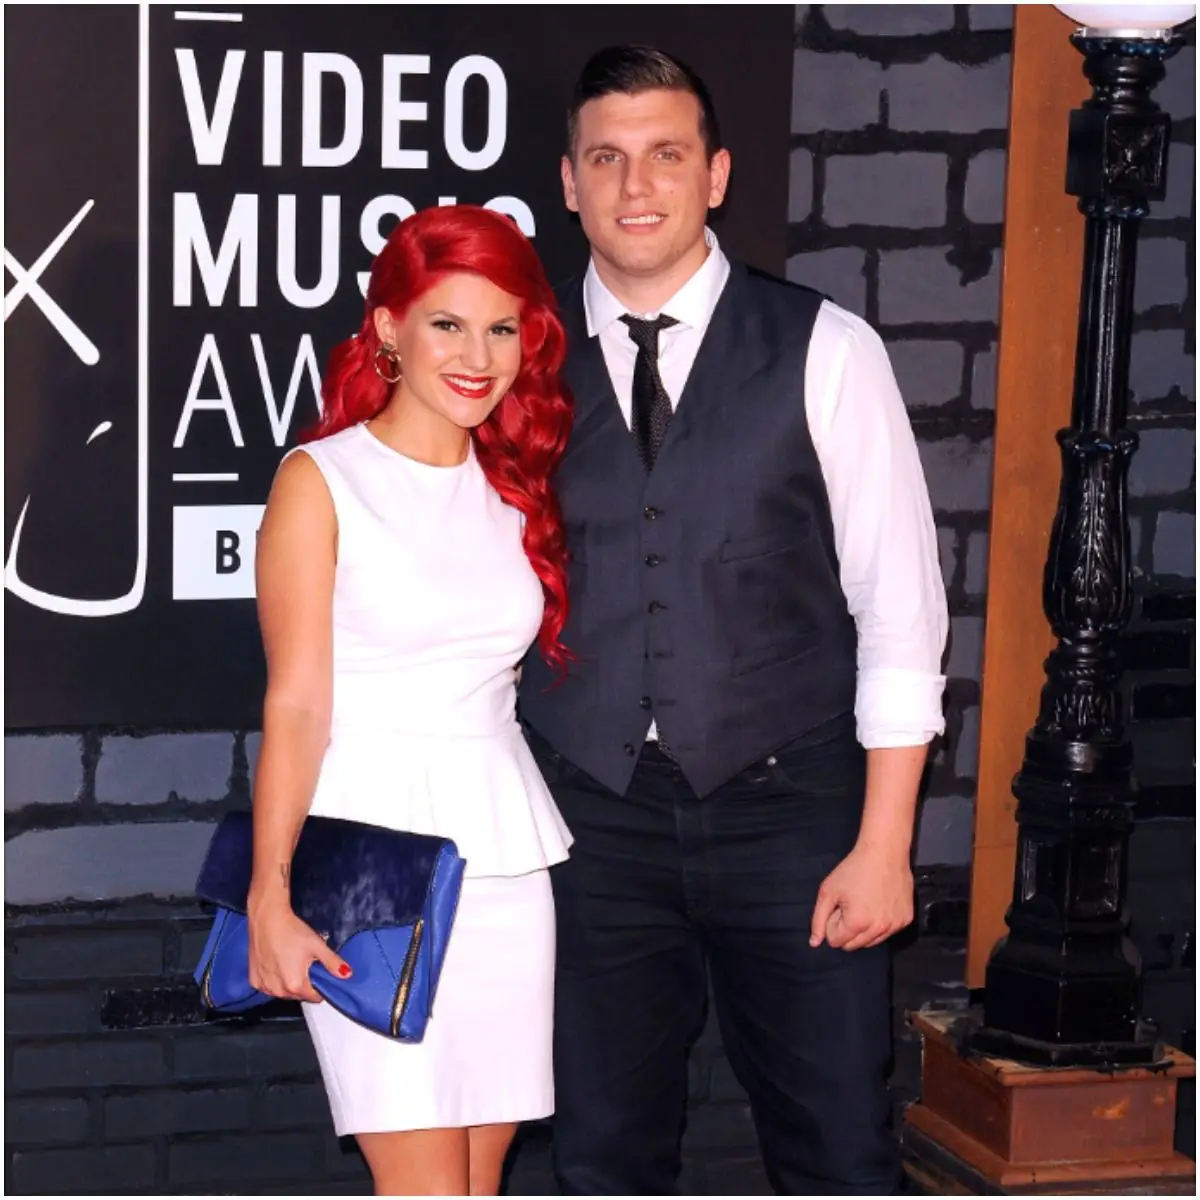 Chris Distefano and girlfriend Carly Aquilino